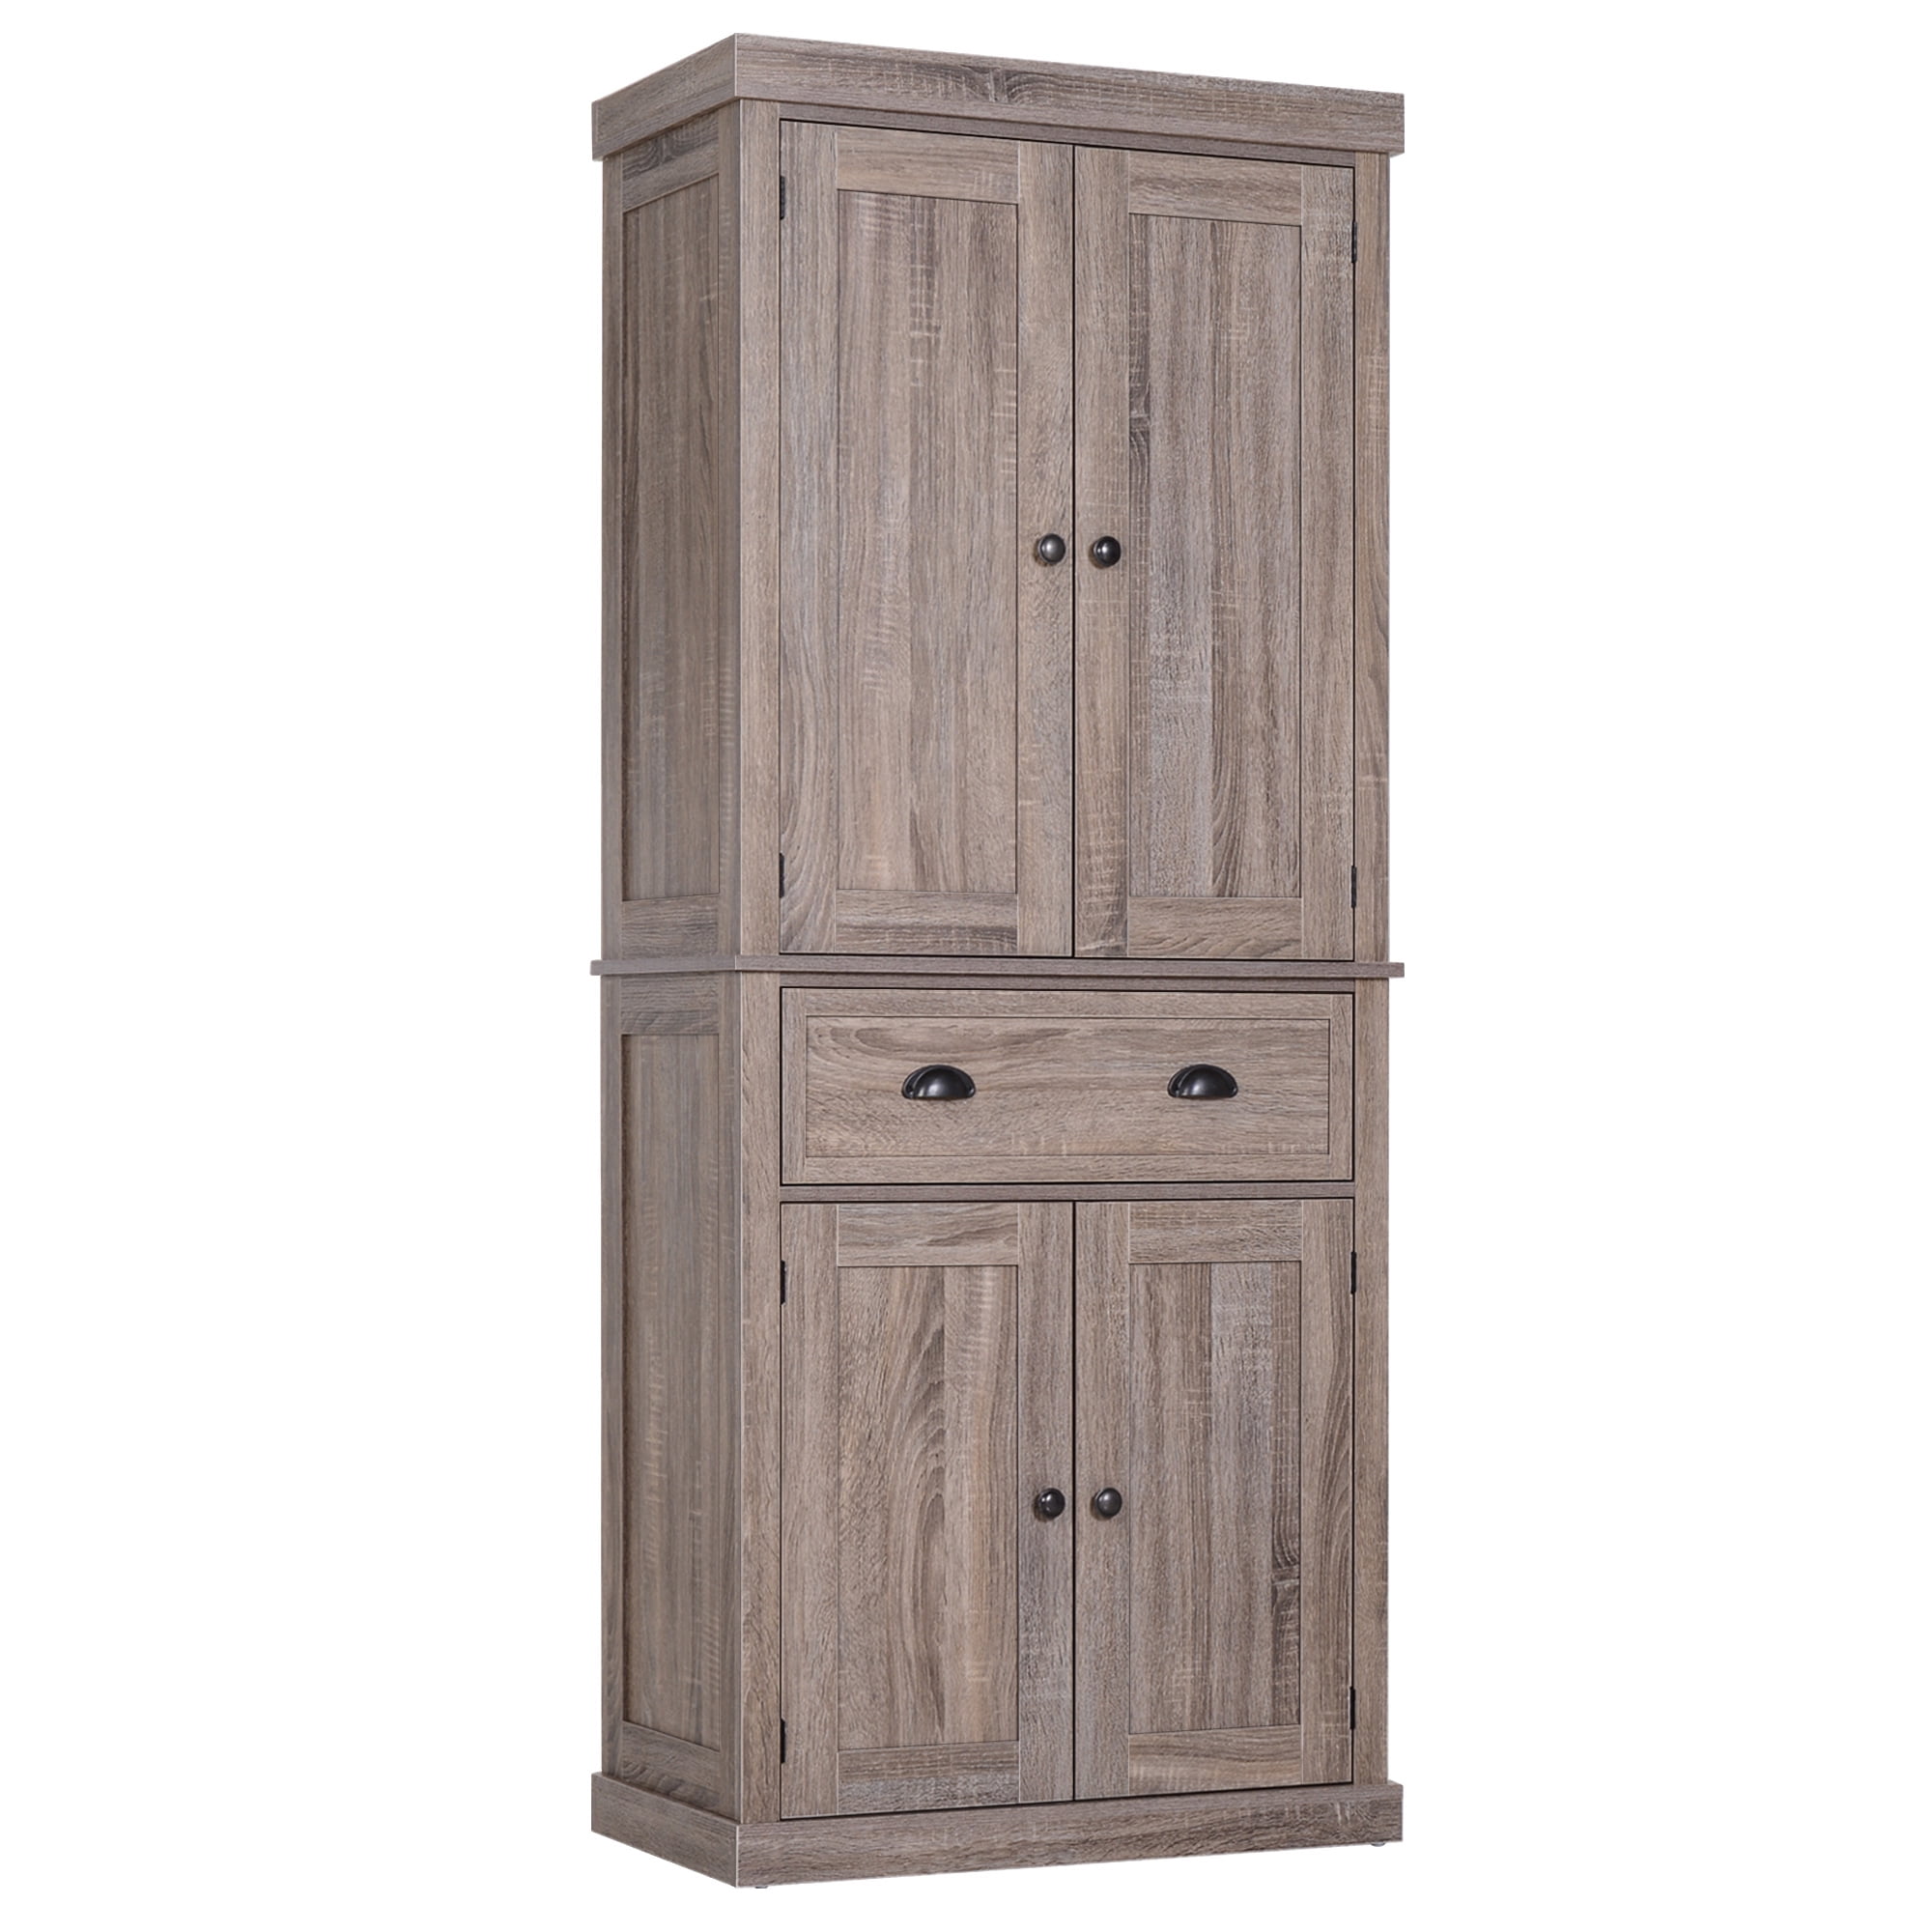 HomCom 72 H Traditional Colonial Freestanding Kitchen / Bathroom Storage Pantry with 1 Center Drawer and 2 Cabinets